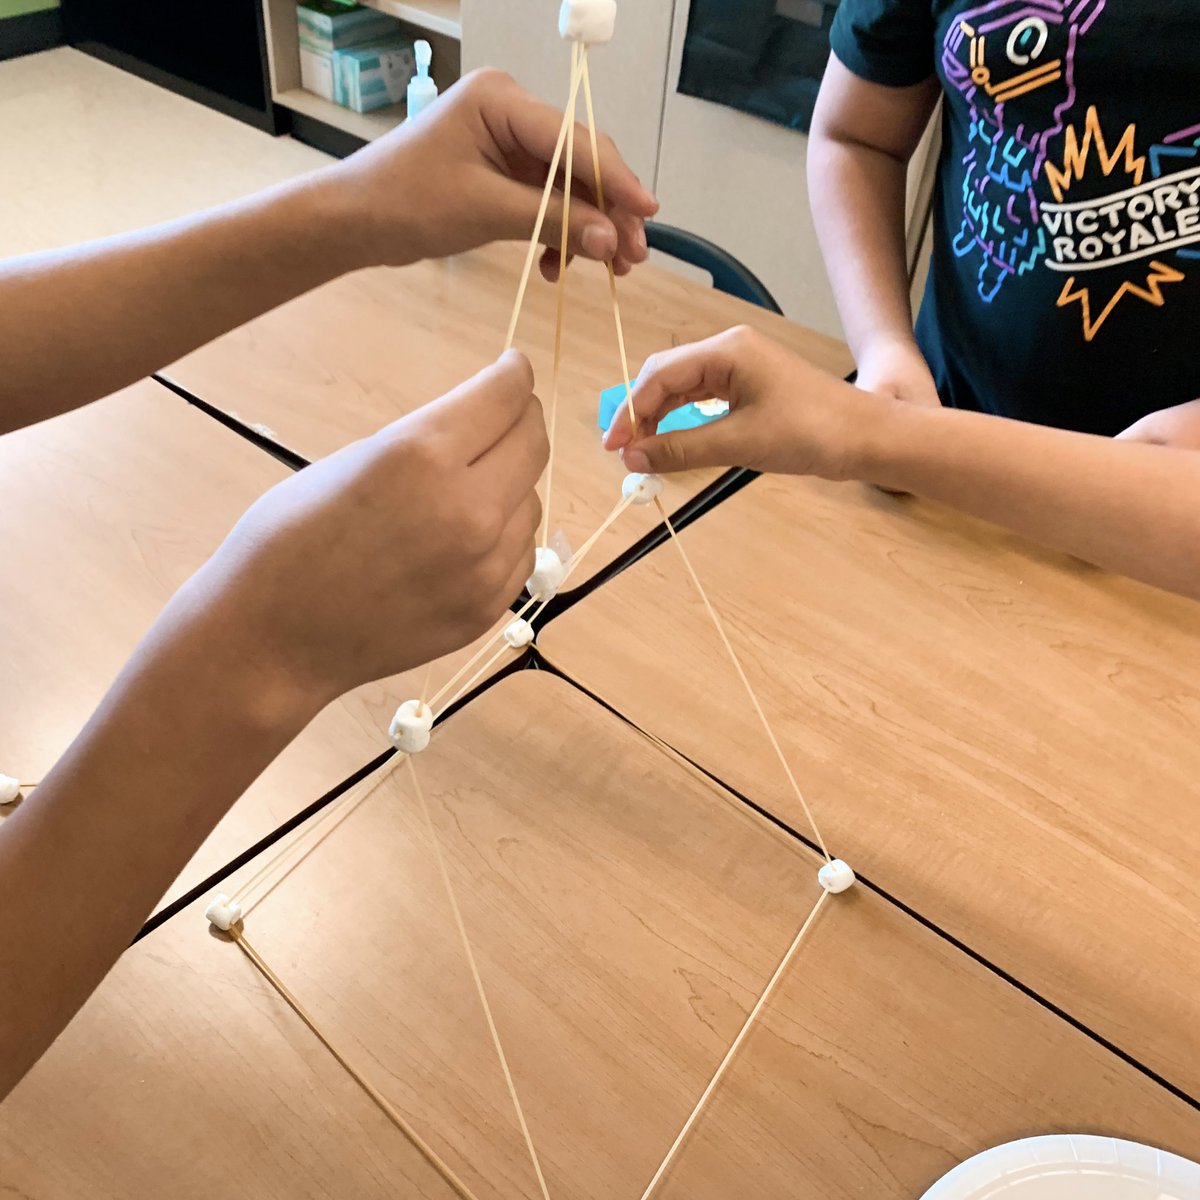 My 3rd graders were challenged to build the largest “Marshmallow Tower” possible! They showcased all the #P3 qualities of great mathematicians! #P3ProblemSolver #P3ProductiveStruggle #P3PositiveDisposition #GardensElem #PISDScience